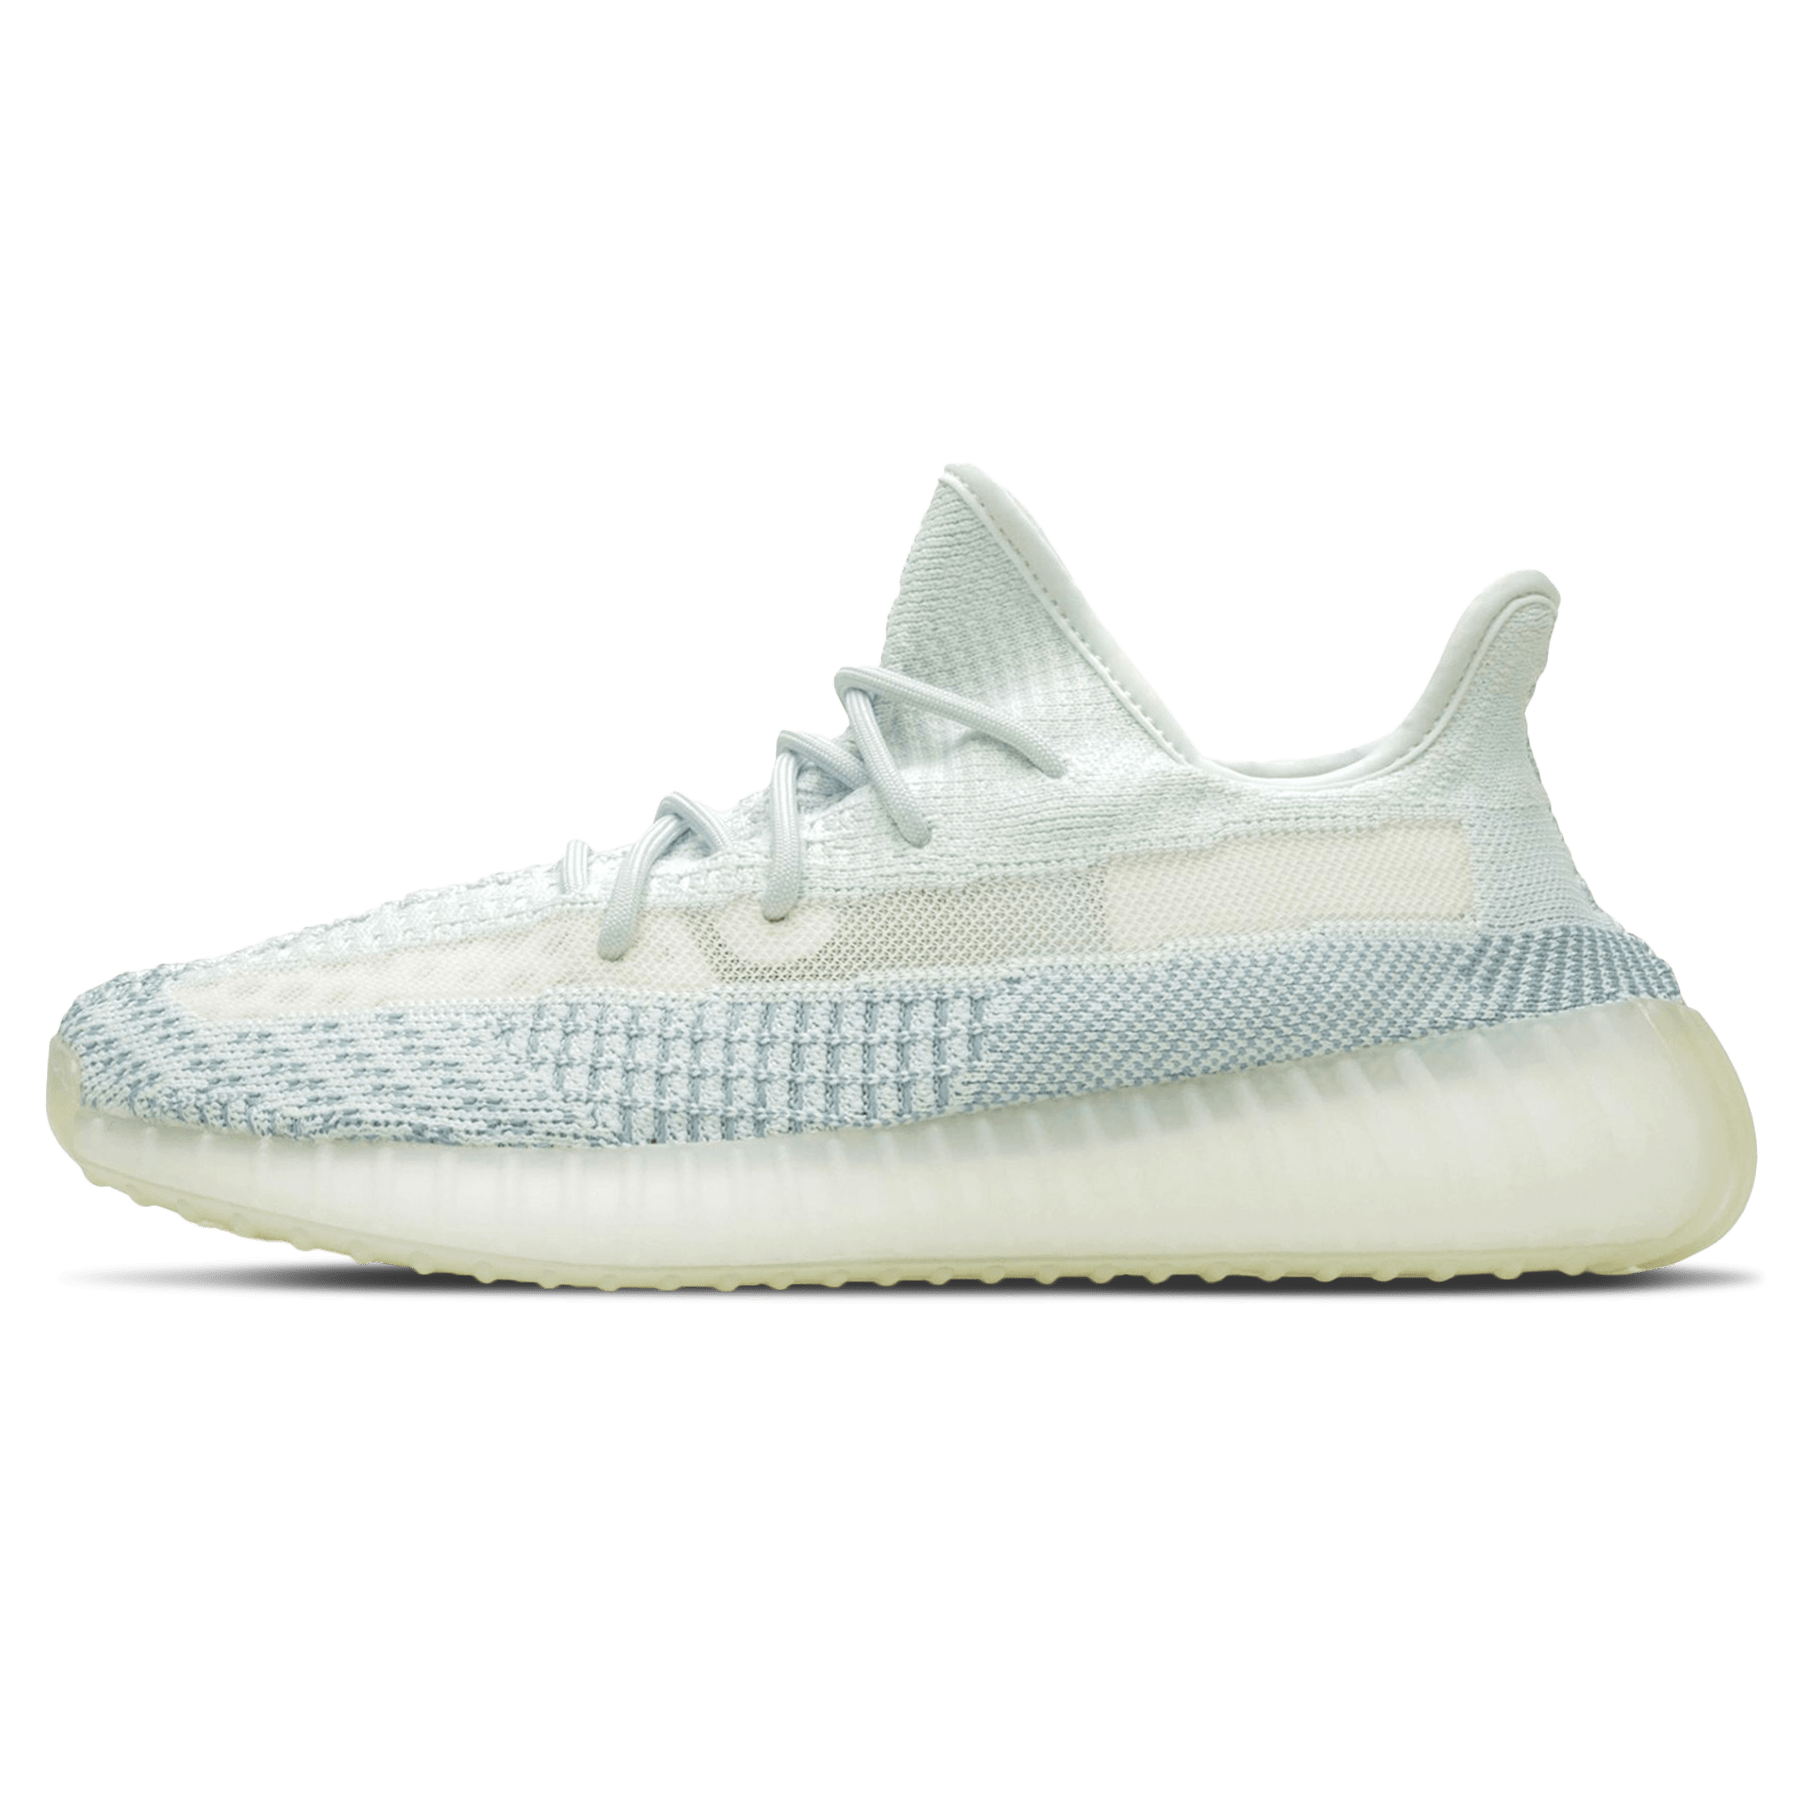 Adidas Yeezy Boost 350 V2 Cloud White Non-Reflective FW3043 Size 12 New  191534613528 | eBay